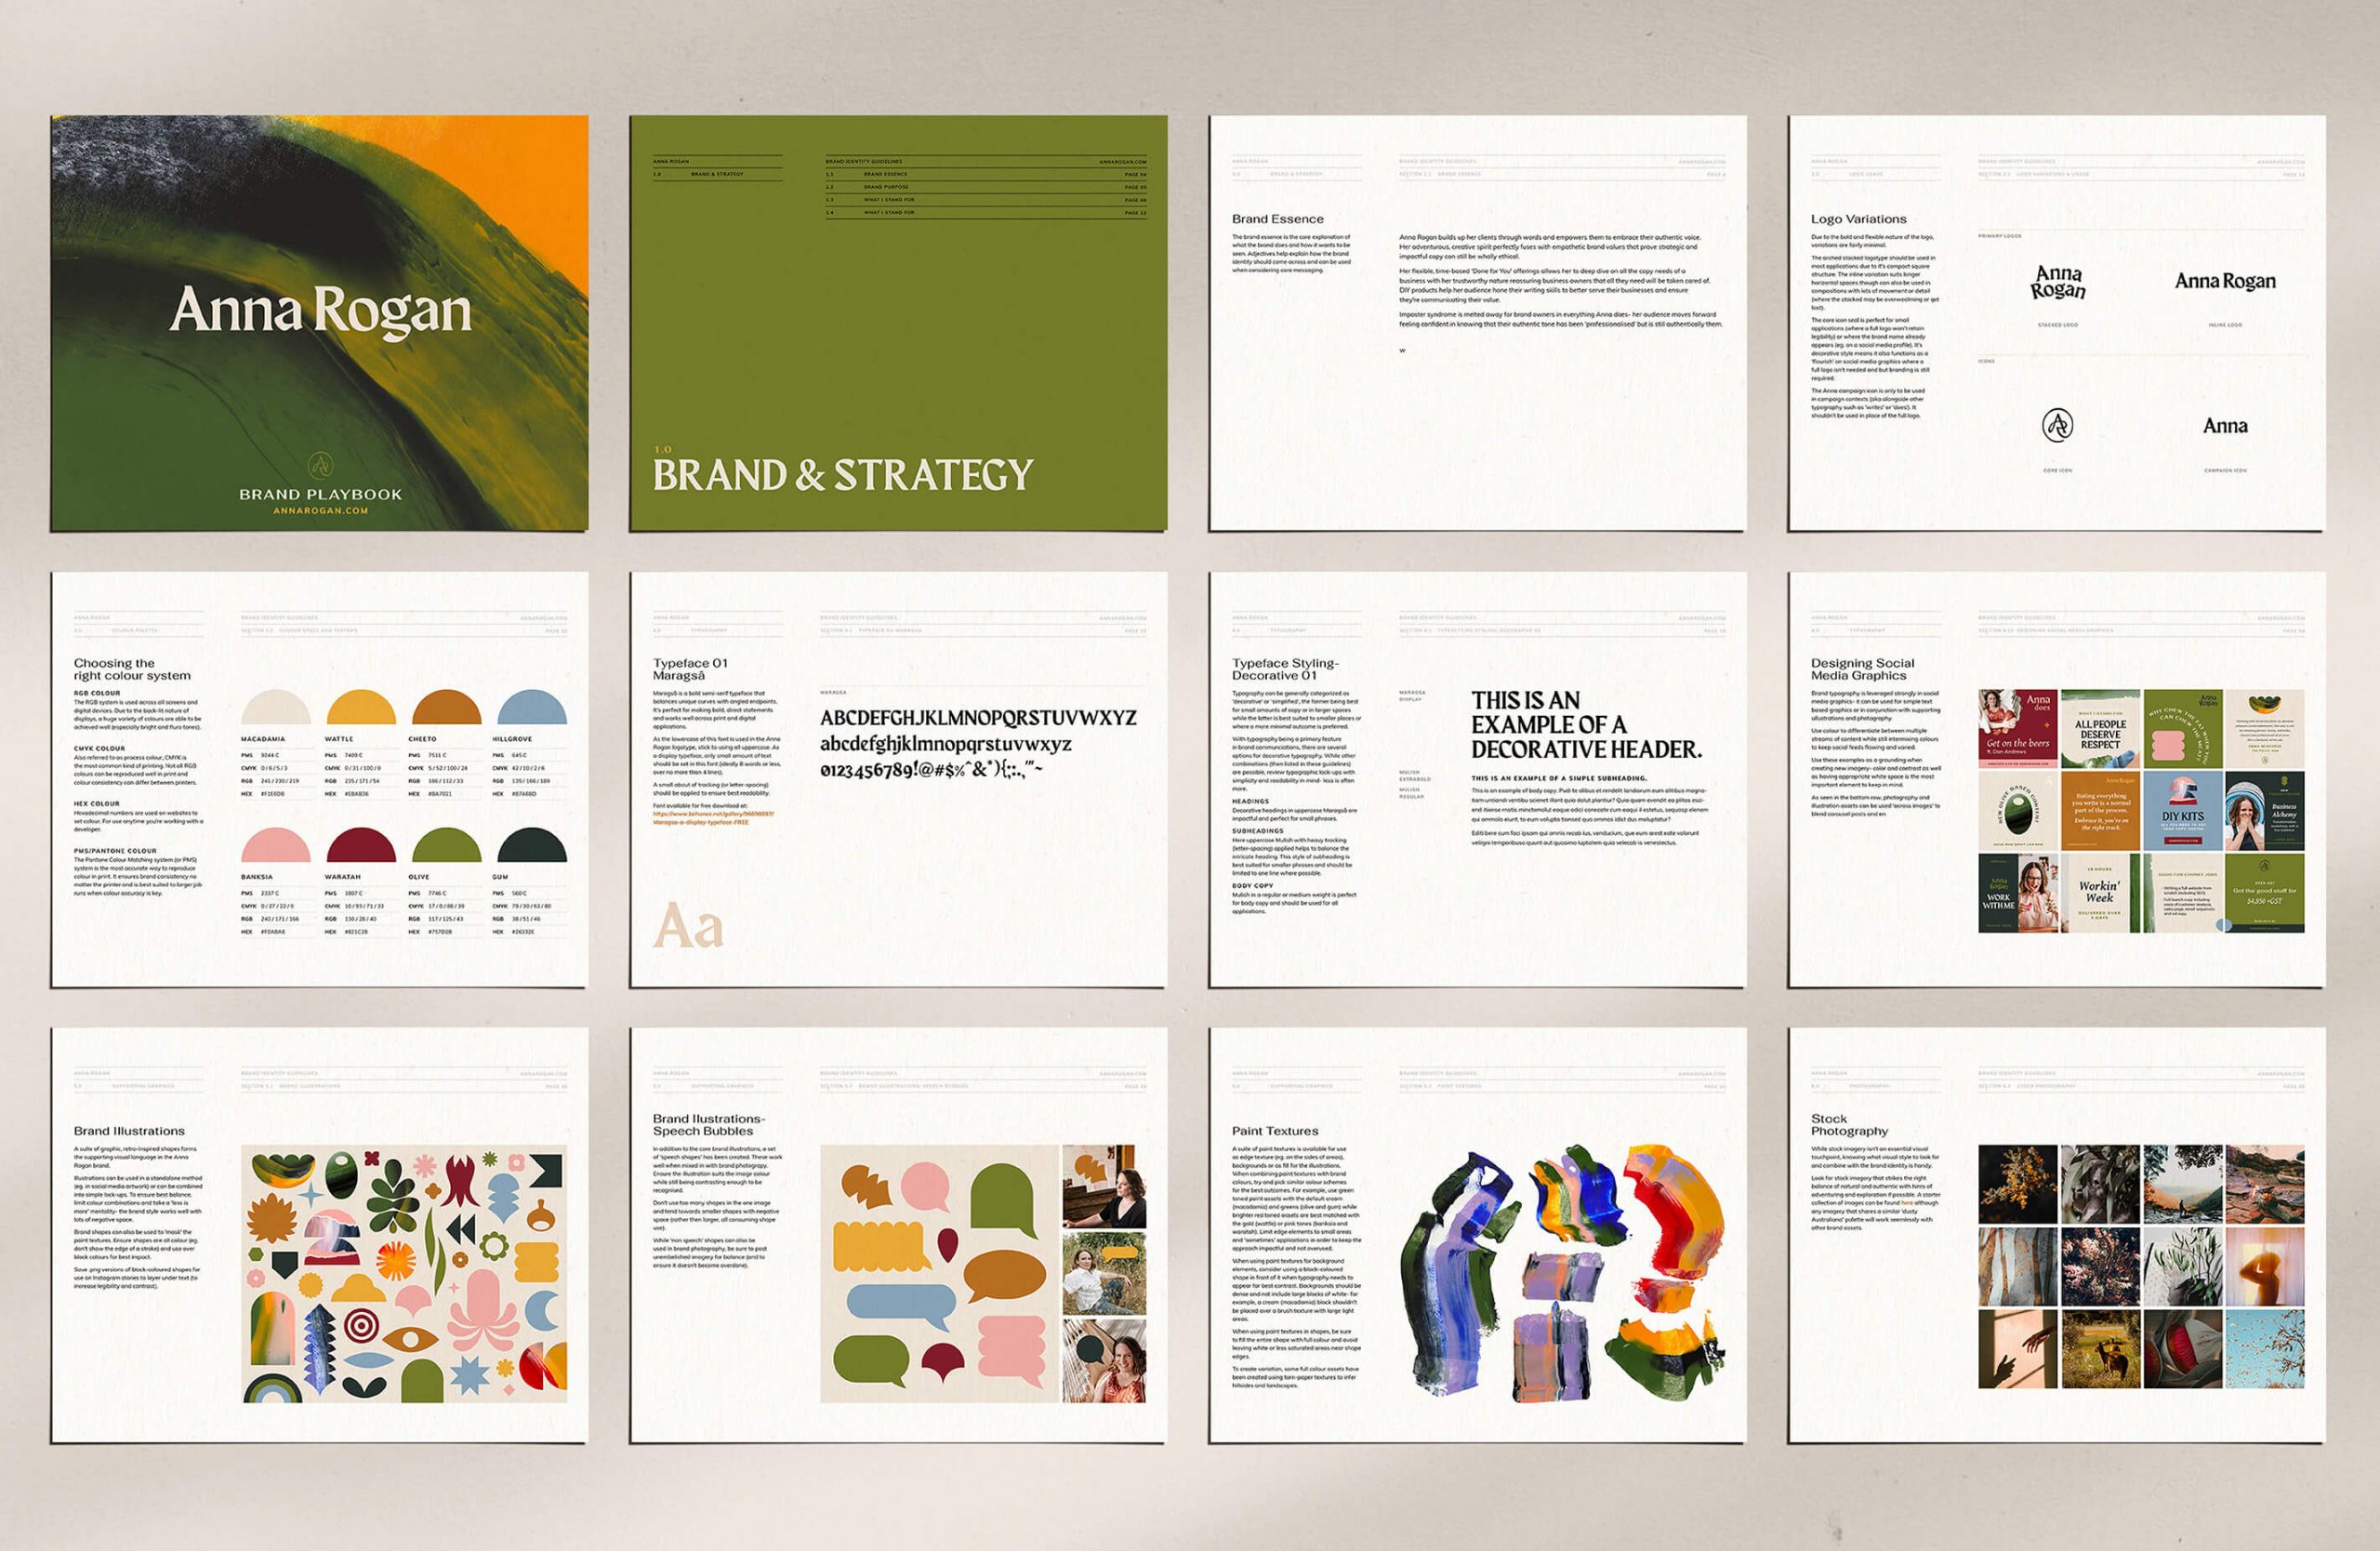 Brand designer portfolio image of Anna Rogan brand guidelines. This gives an overview of elements such as how to use typography, colour specifications, the range of illustration assets and photography standards.